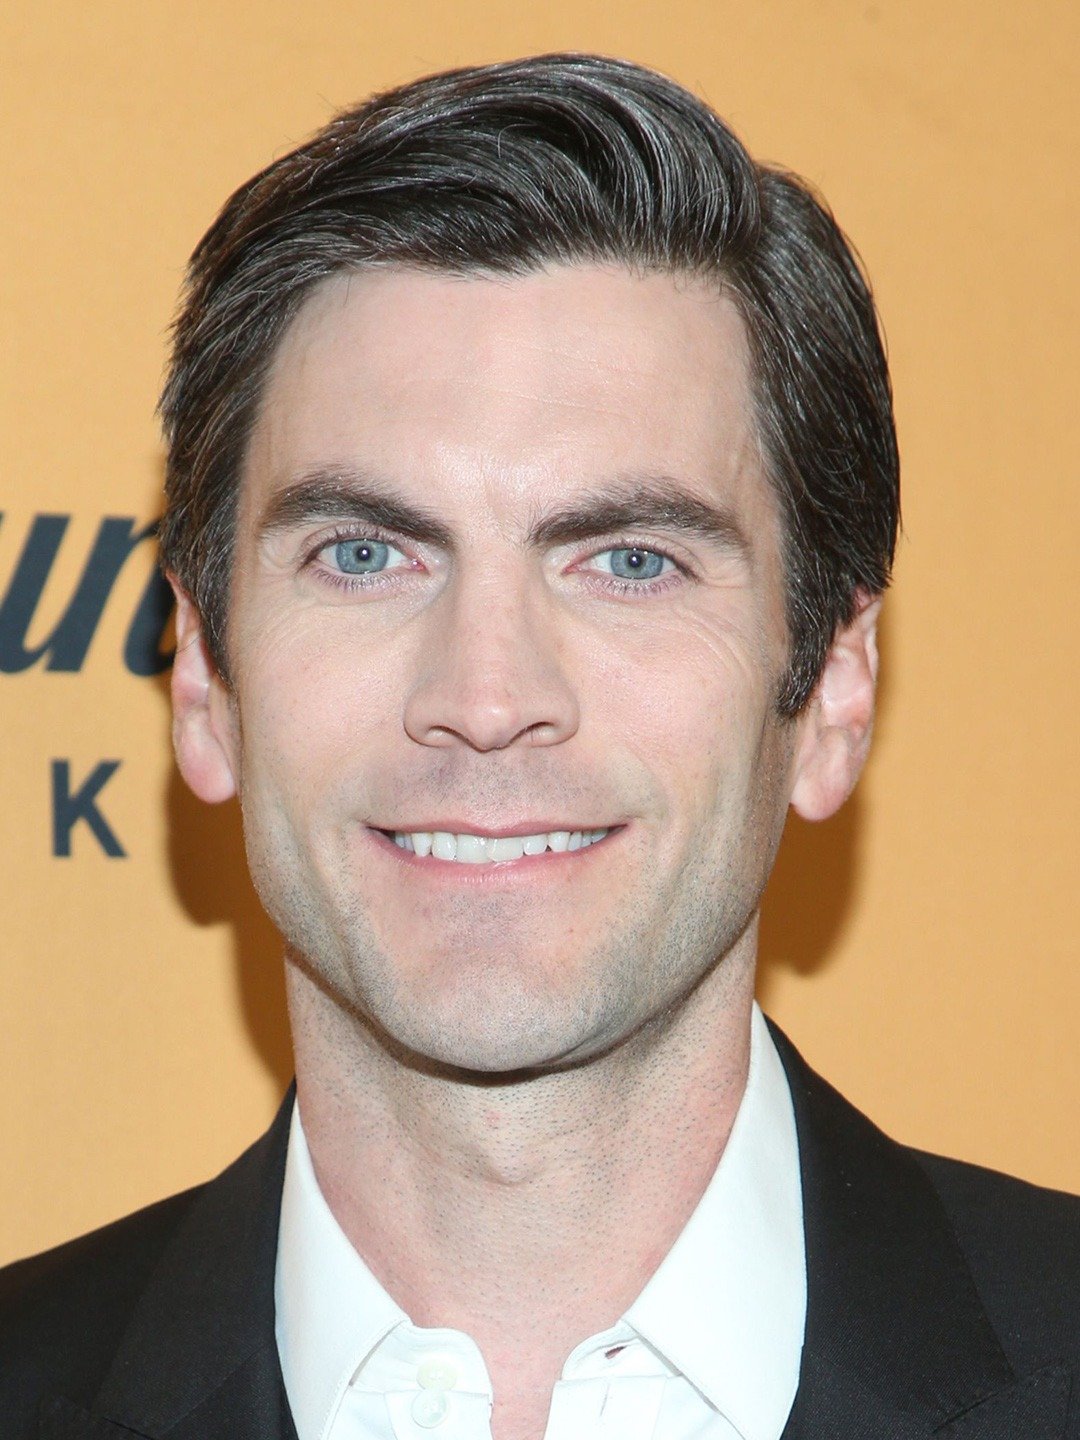 How tall is Wes Bentley?